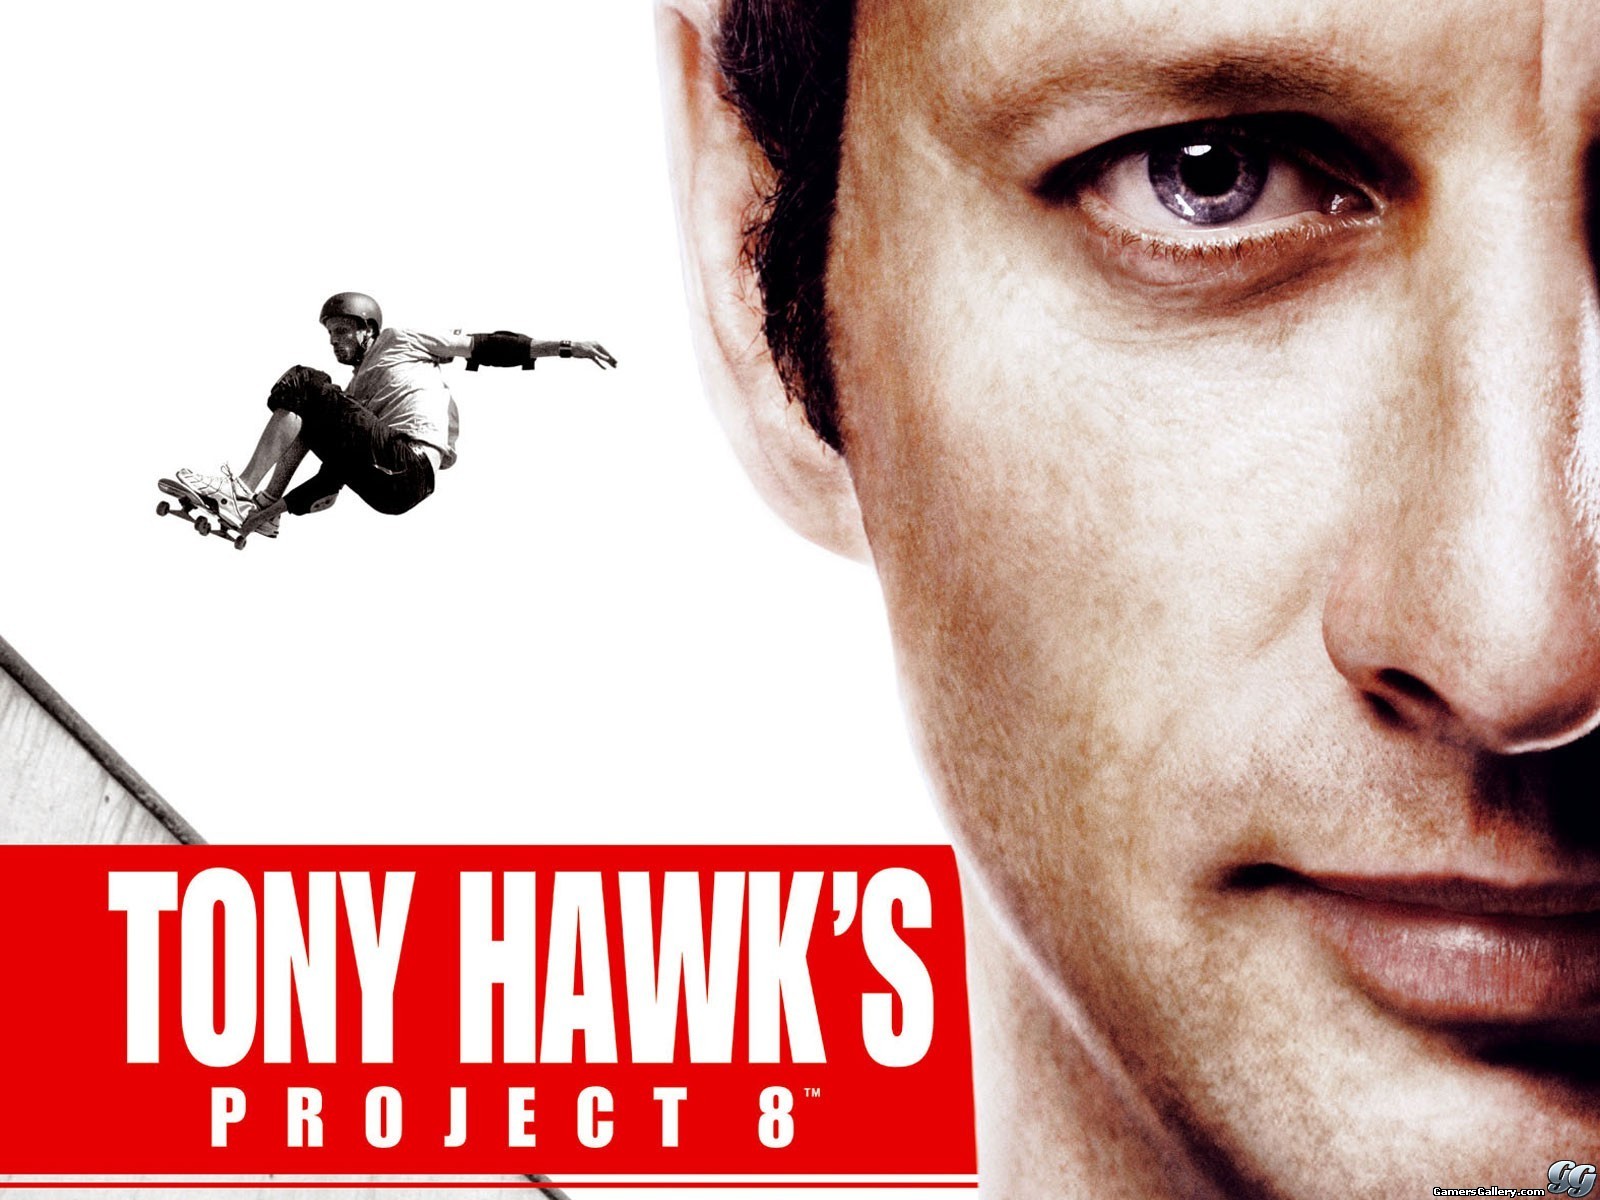 Gamers Gallery - Tony Hawks Project 8 Exclusive Wallpaper